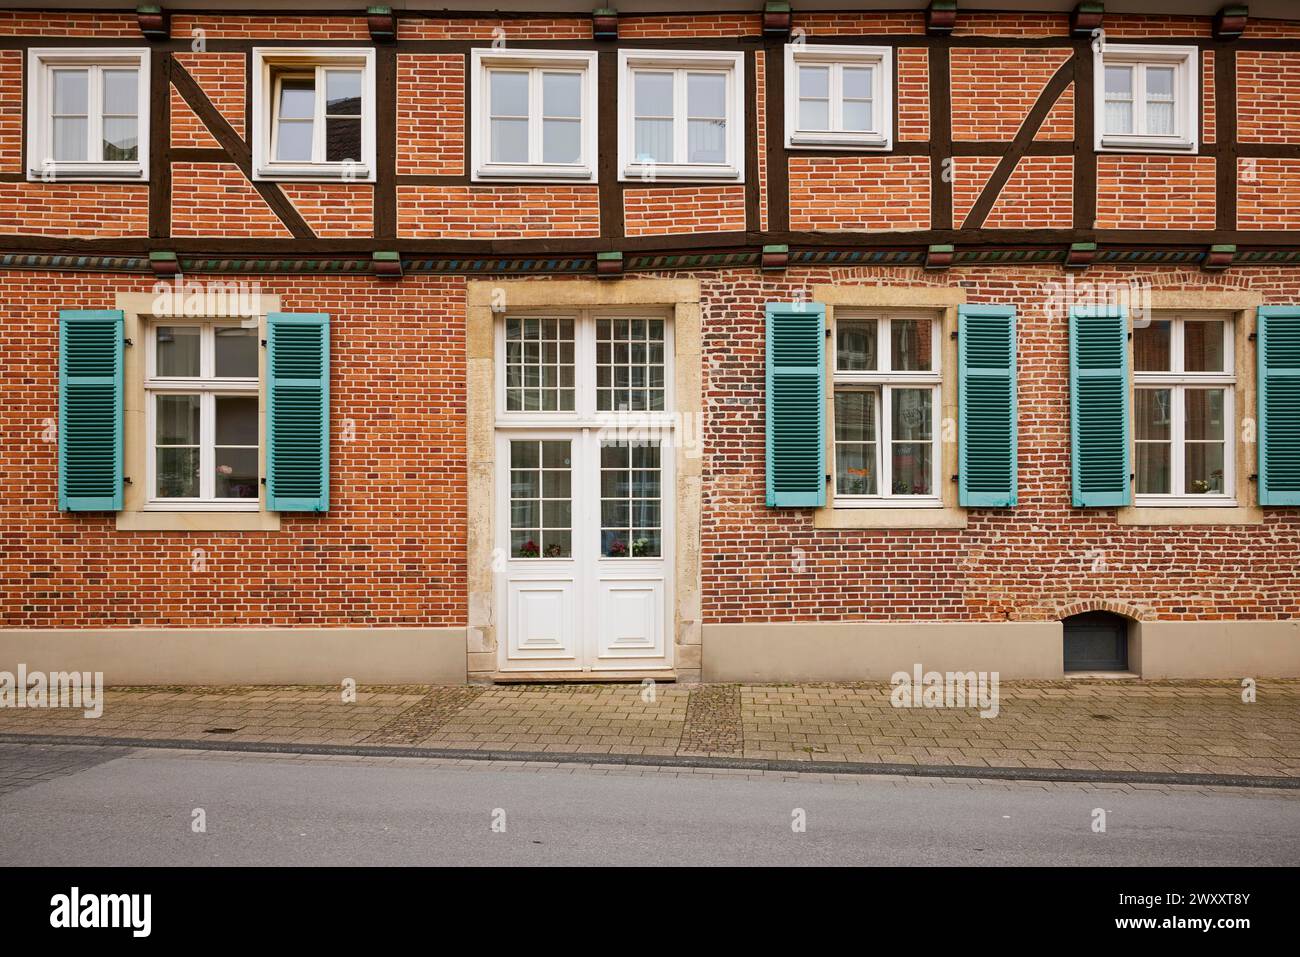 Facade of a half-timbered brick house with white windows, a mighty entrance door and blue-green shutters in Warendorf, Warendorf district, North Stock Photo